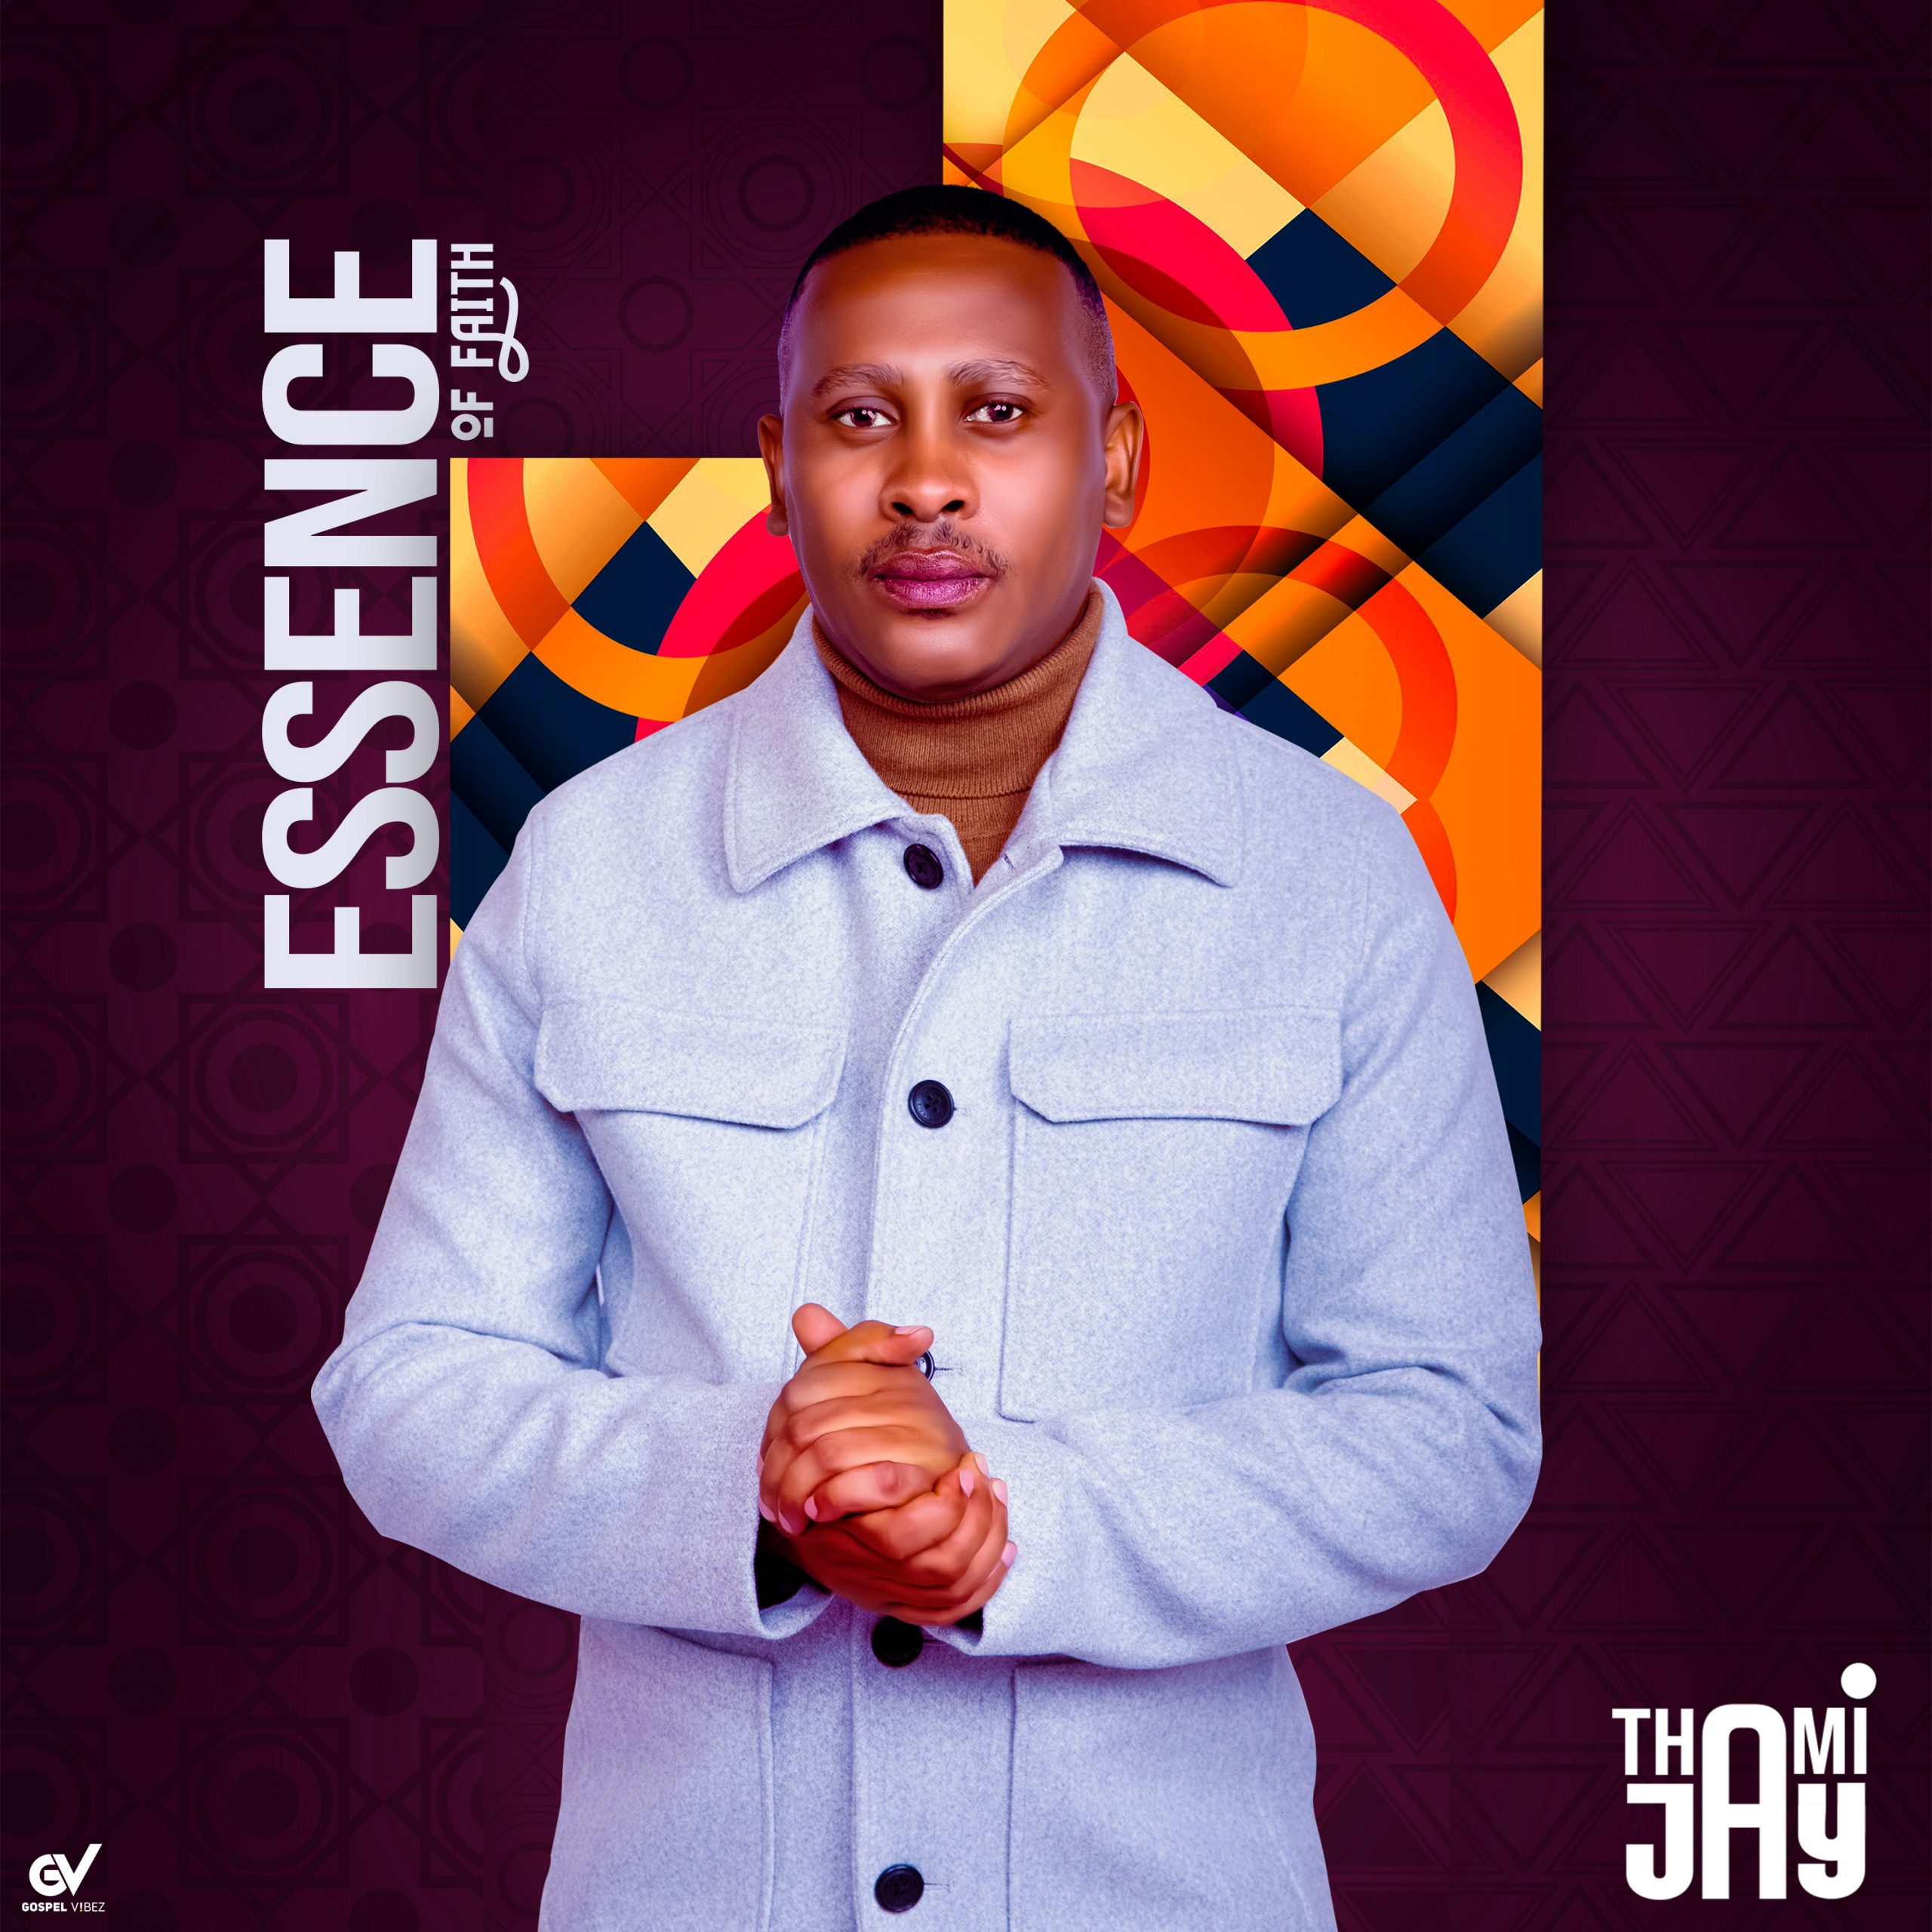 Immerse Yourself in the Soul-Stirring Sounds of ‘Essence of Faith’ by South Africa’s own ‘Thami Jay’.